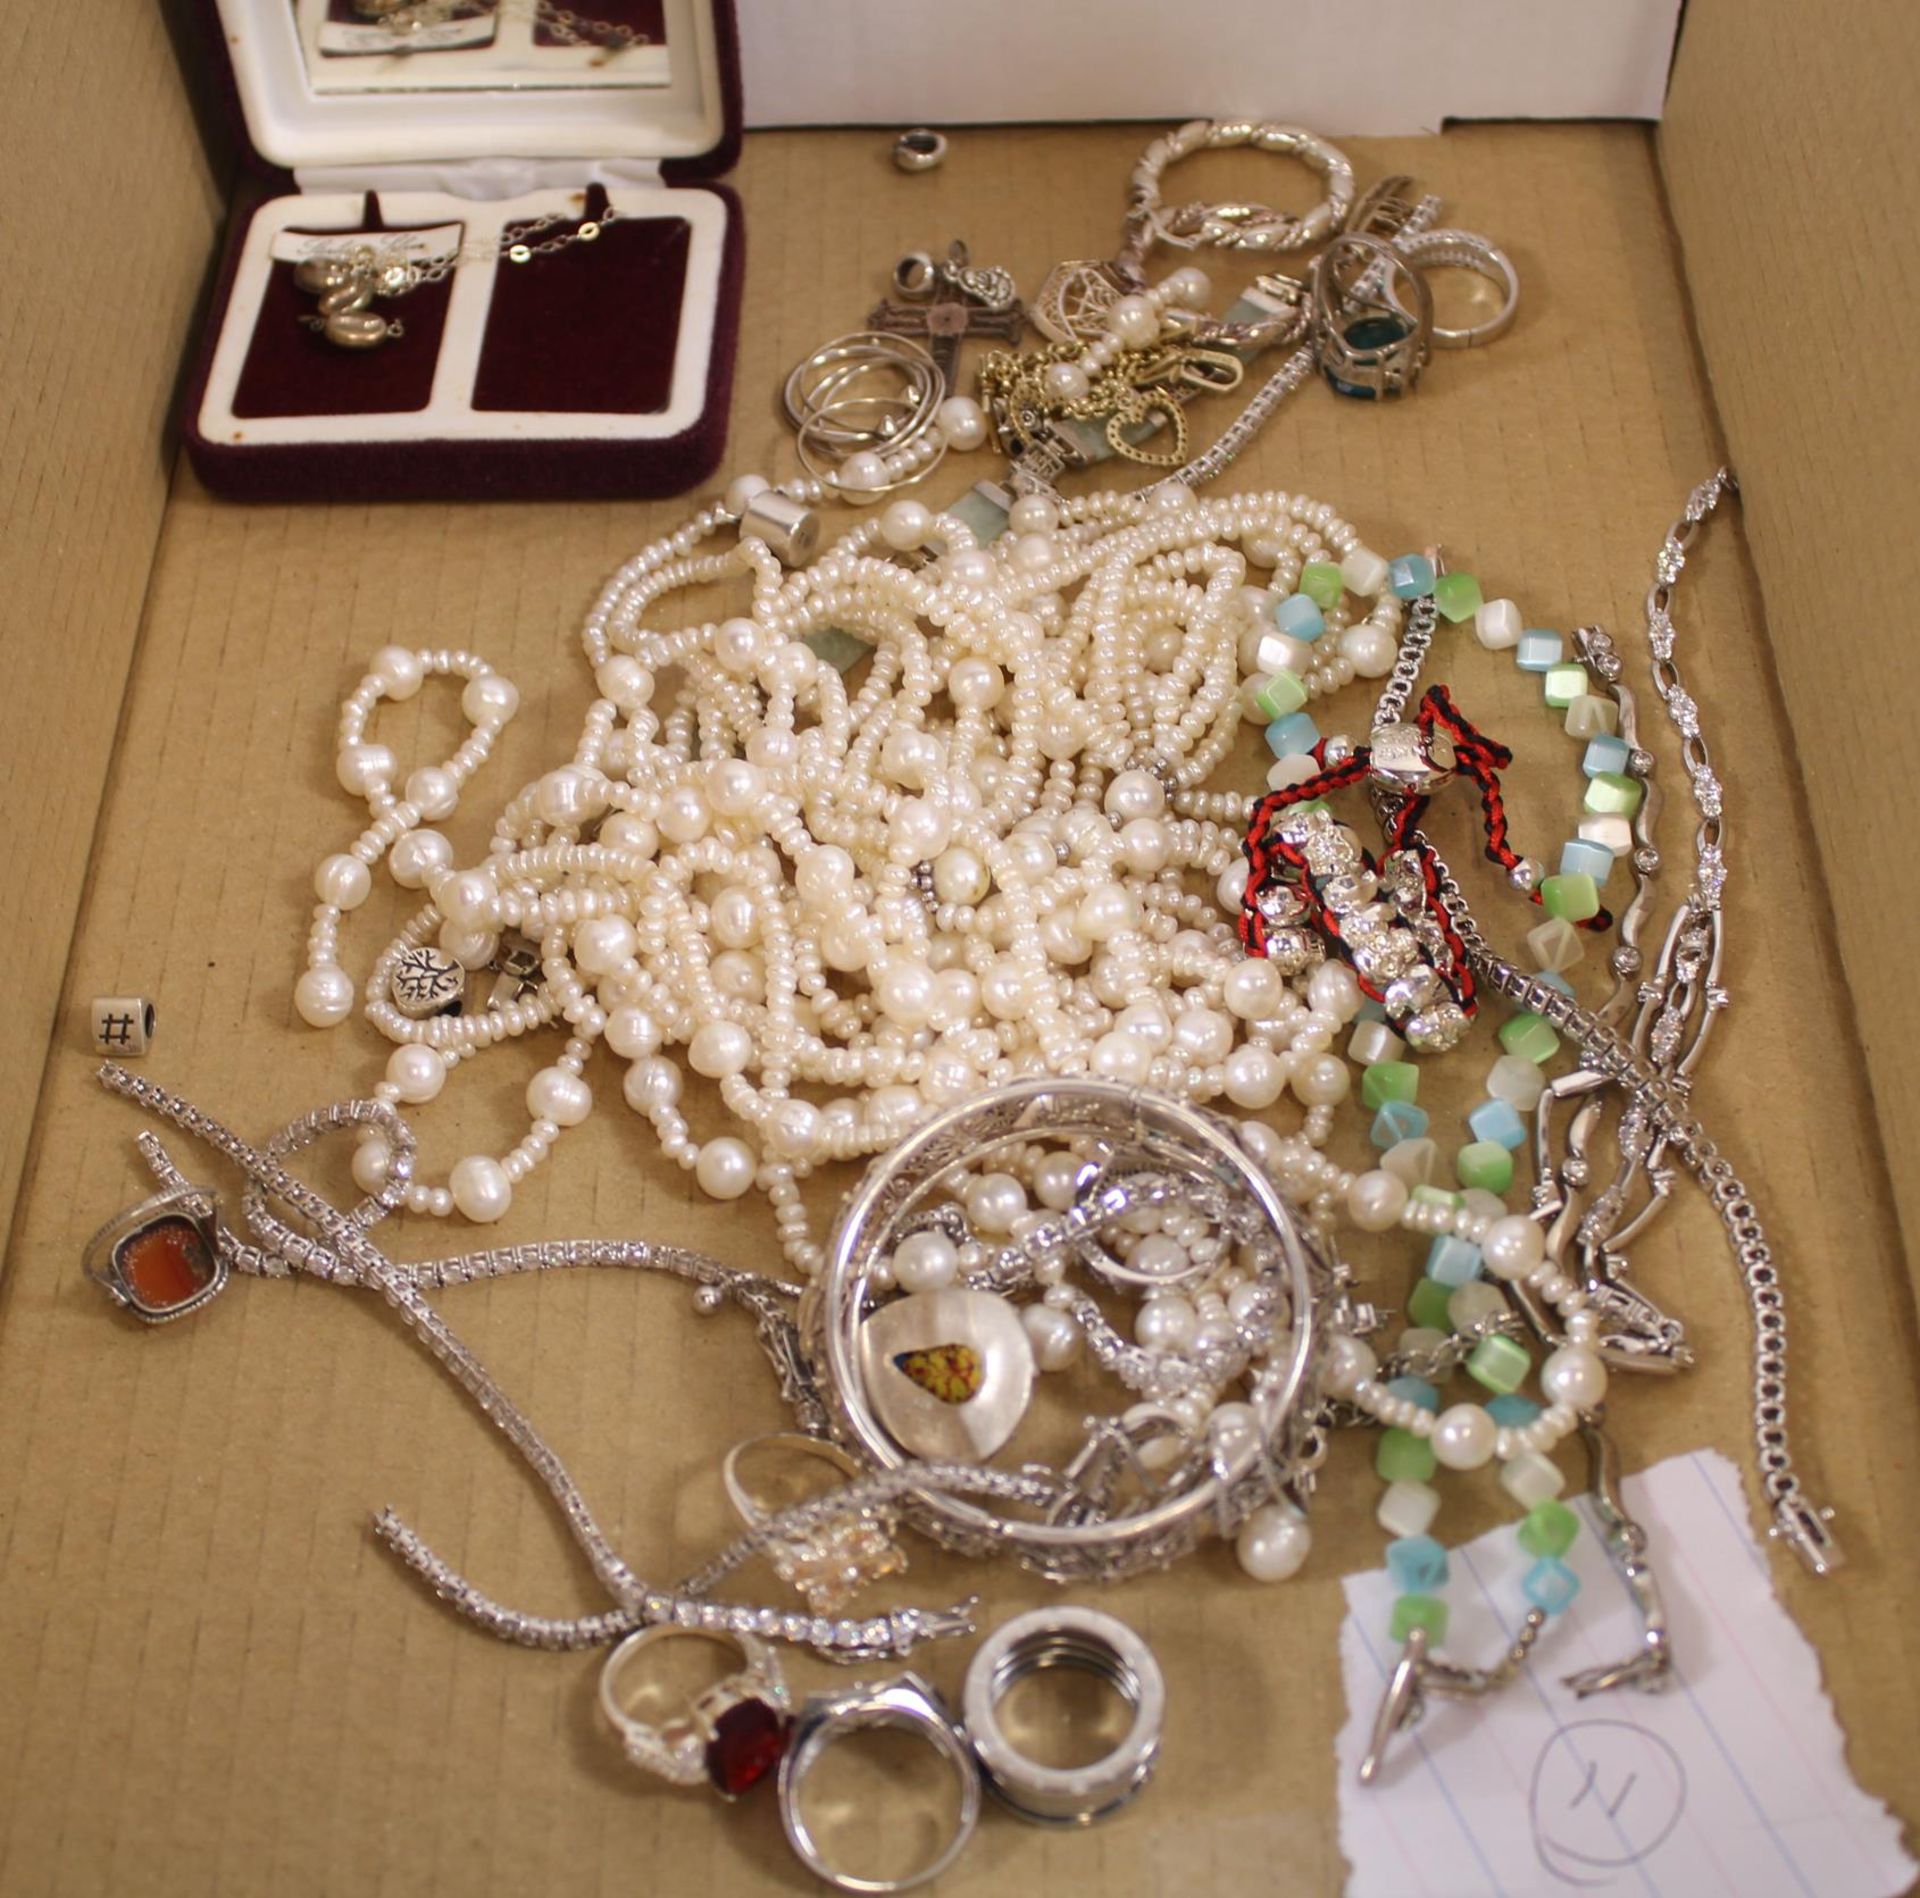 Silver Rings, Earrings, Charms etc., Necklaces marked Dior, Tateossian Links of London etc. and a - Bild 2 aus 2